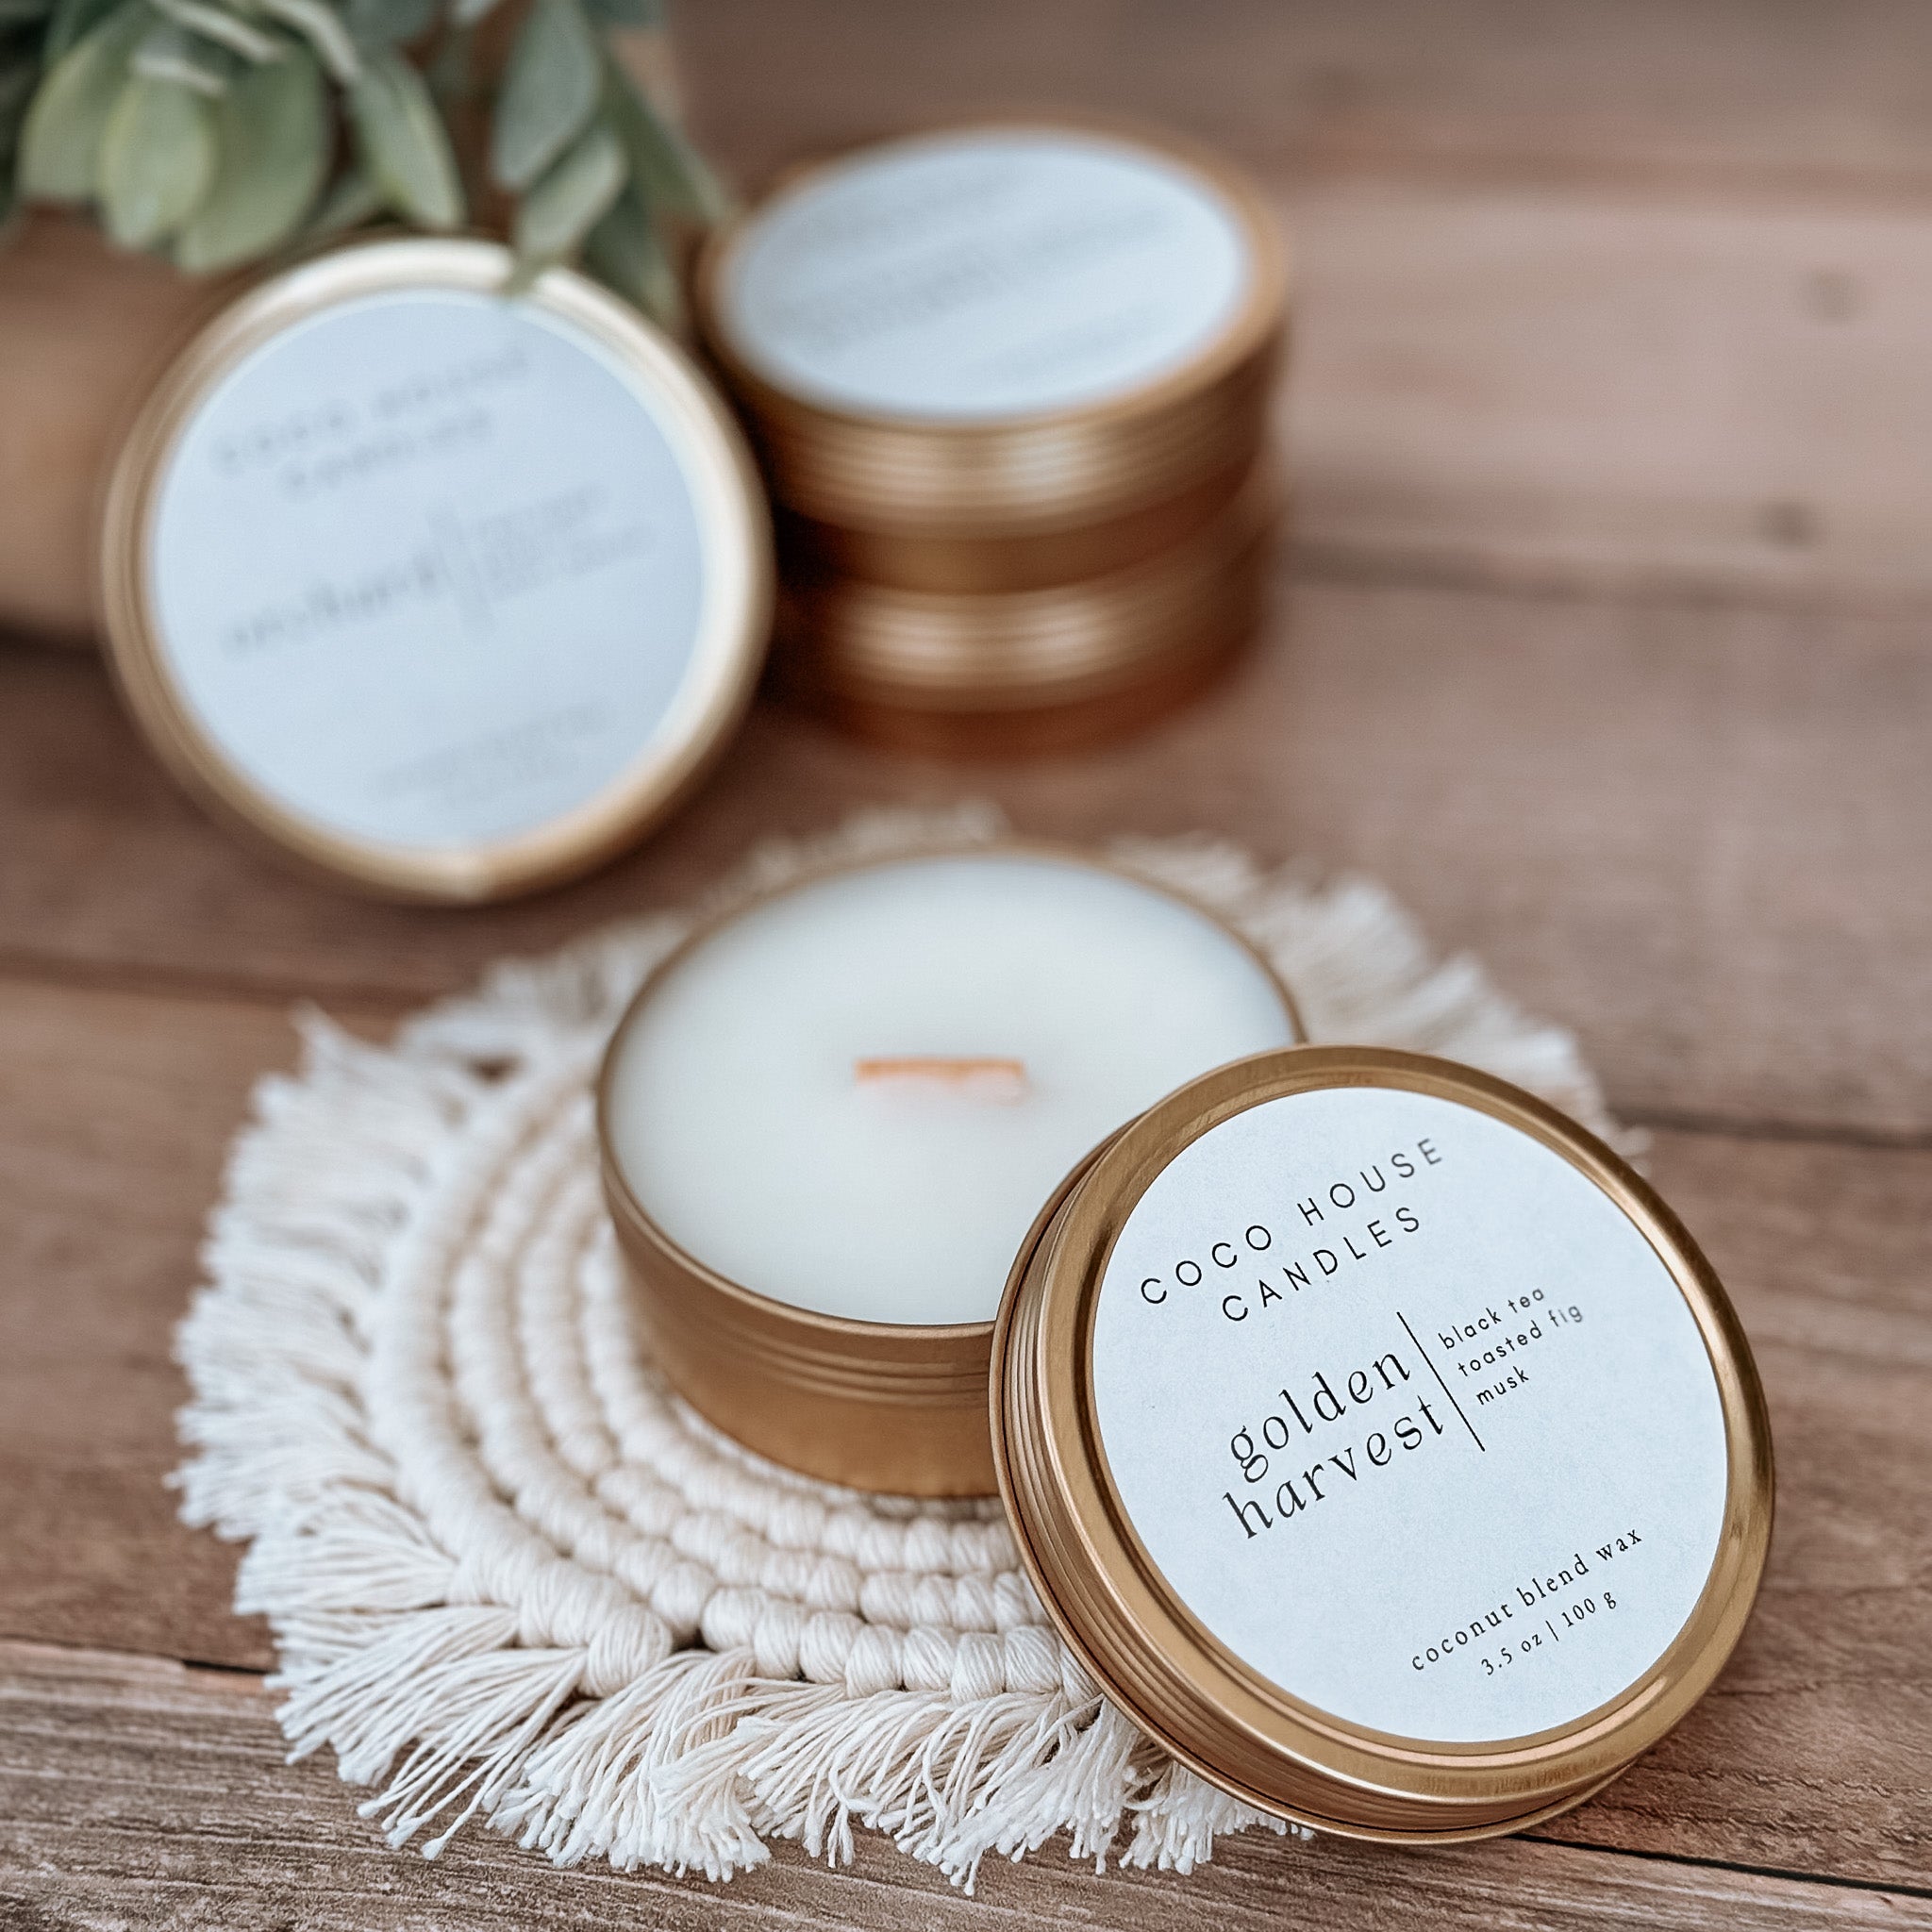 Fall Travel Candles - Coco House Candles - Travel Candle